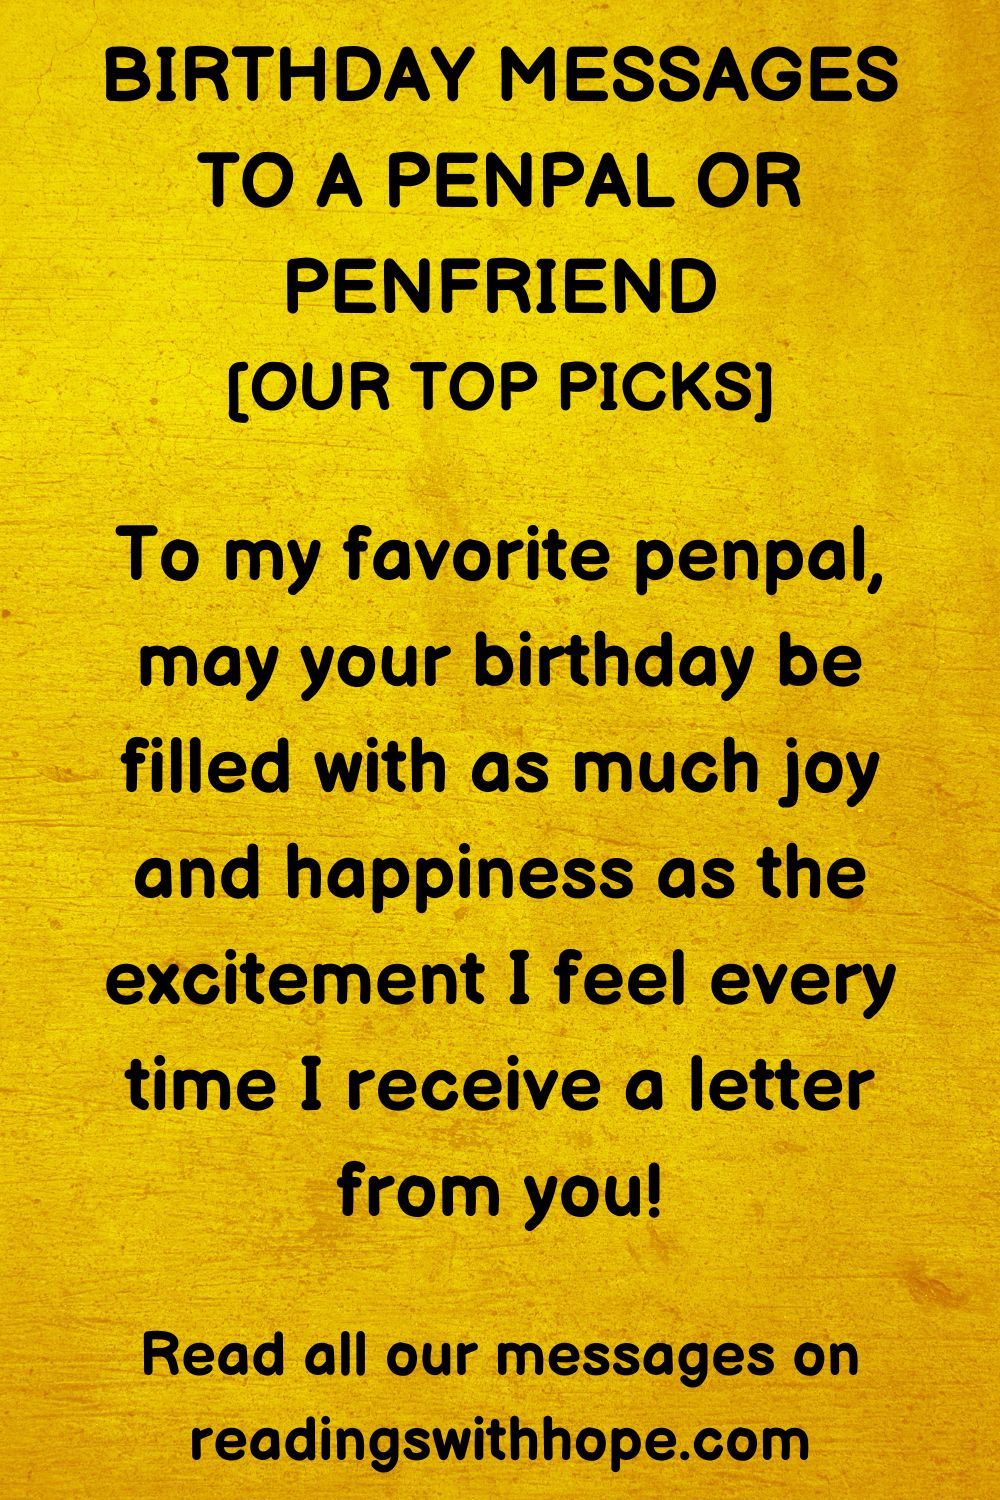 50 Birthday Messages to a Penpal or Penfriend